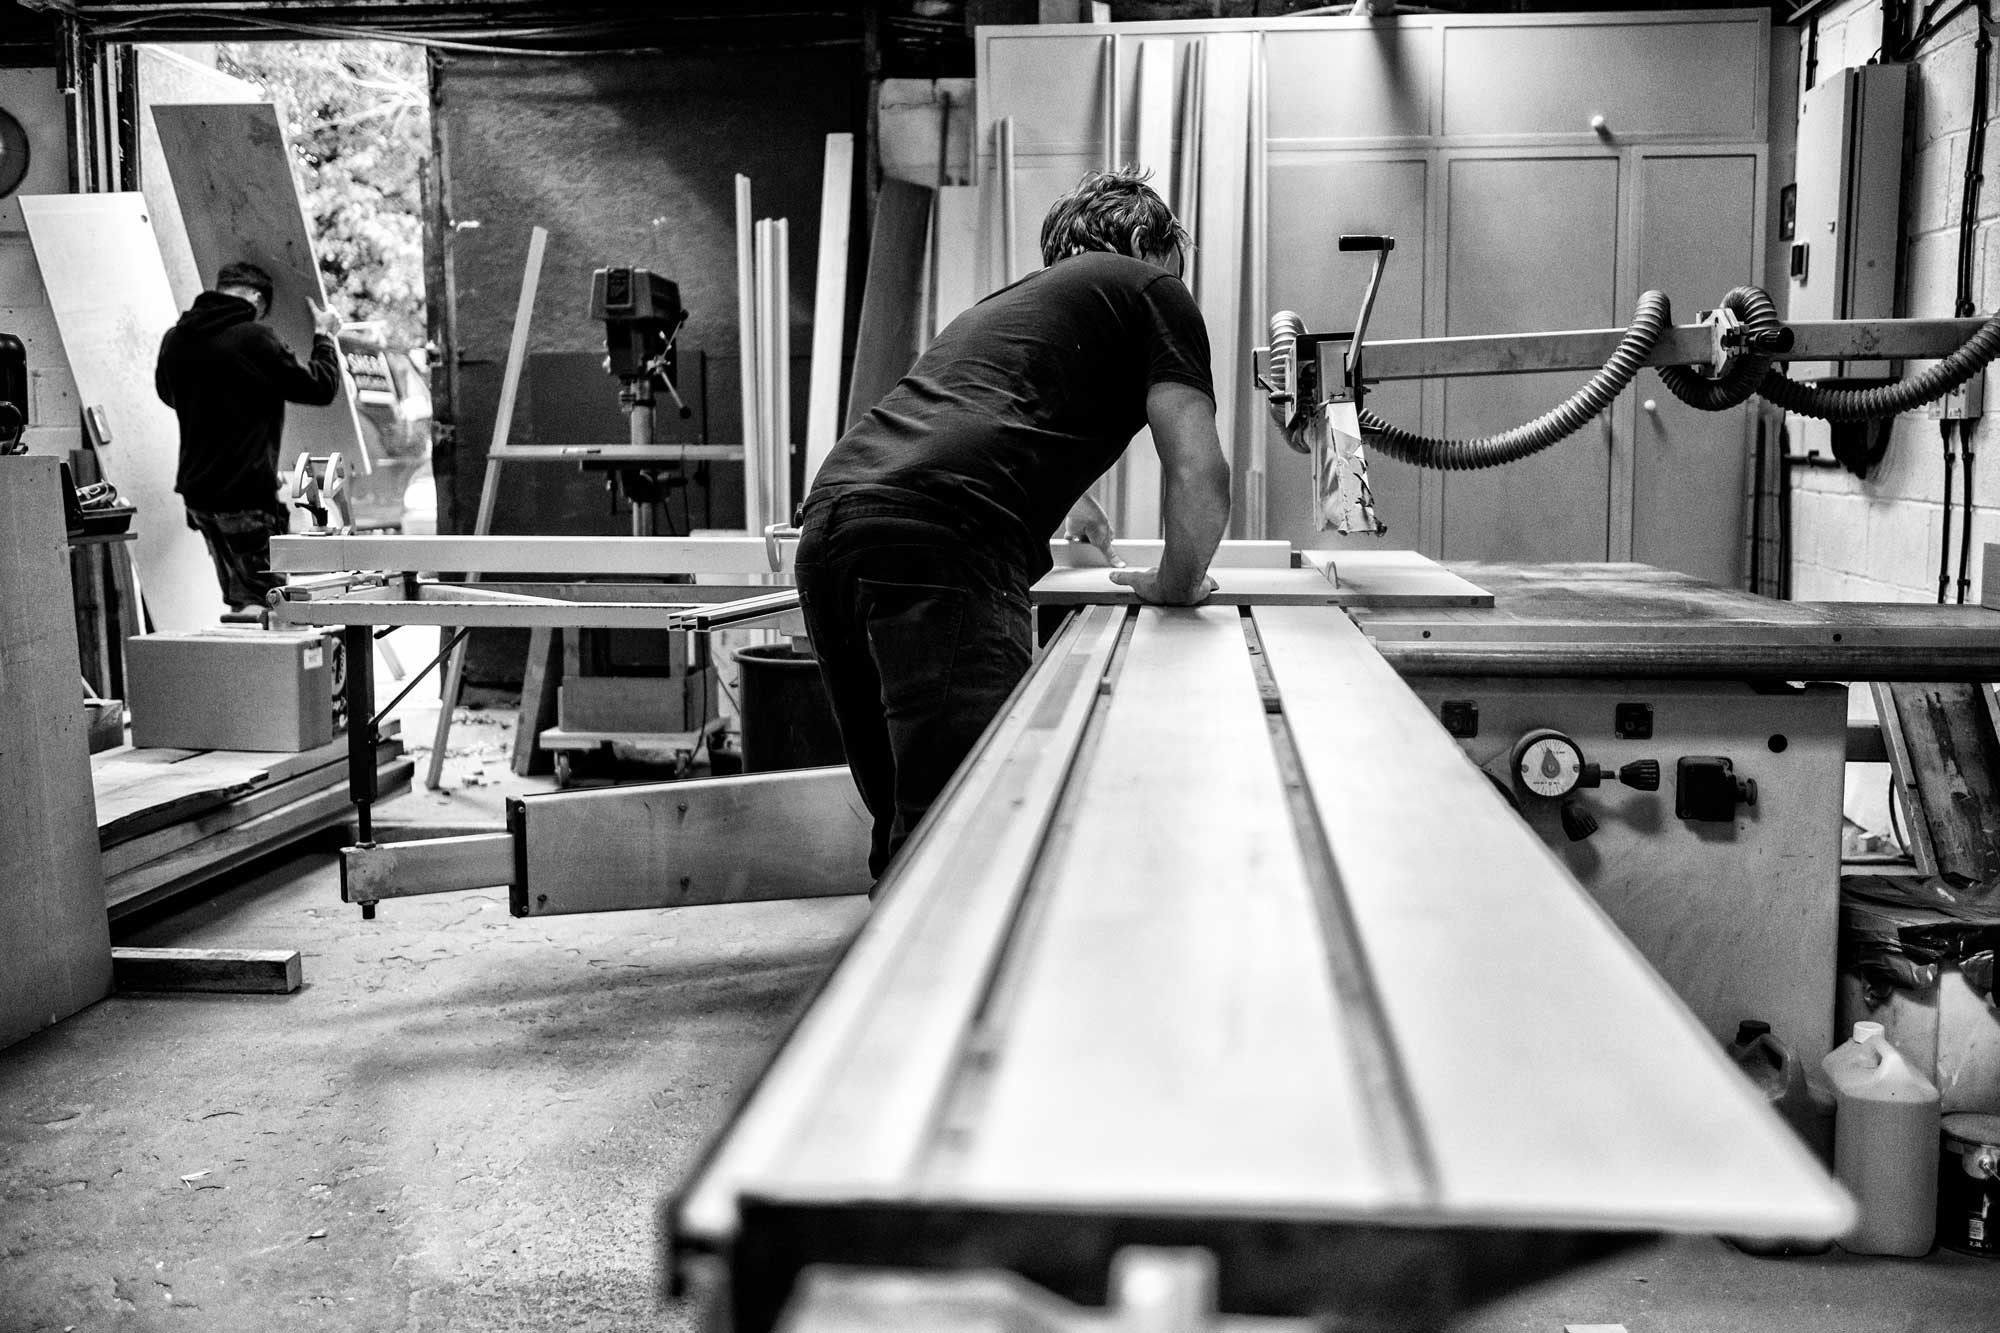 Shere Kitchens Team handcrafting kitchens in the workshop in Shere Guildford Surrey